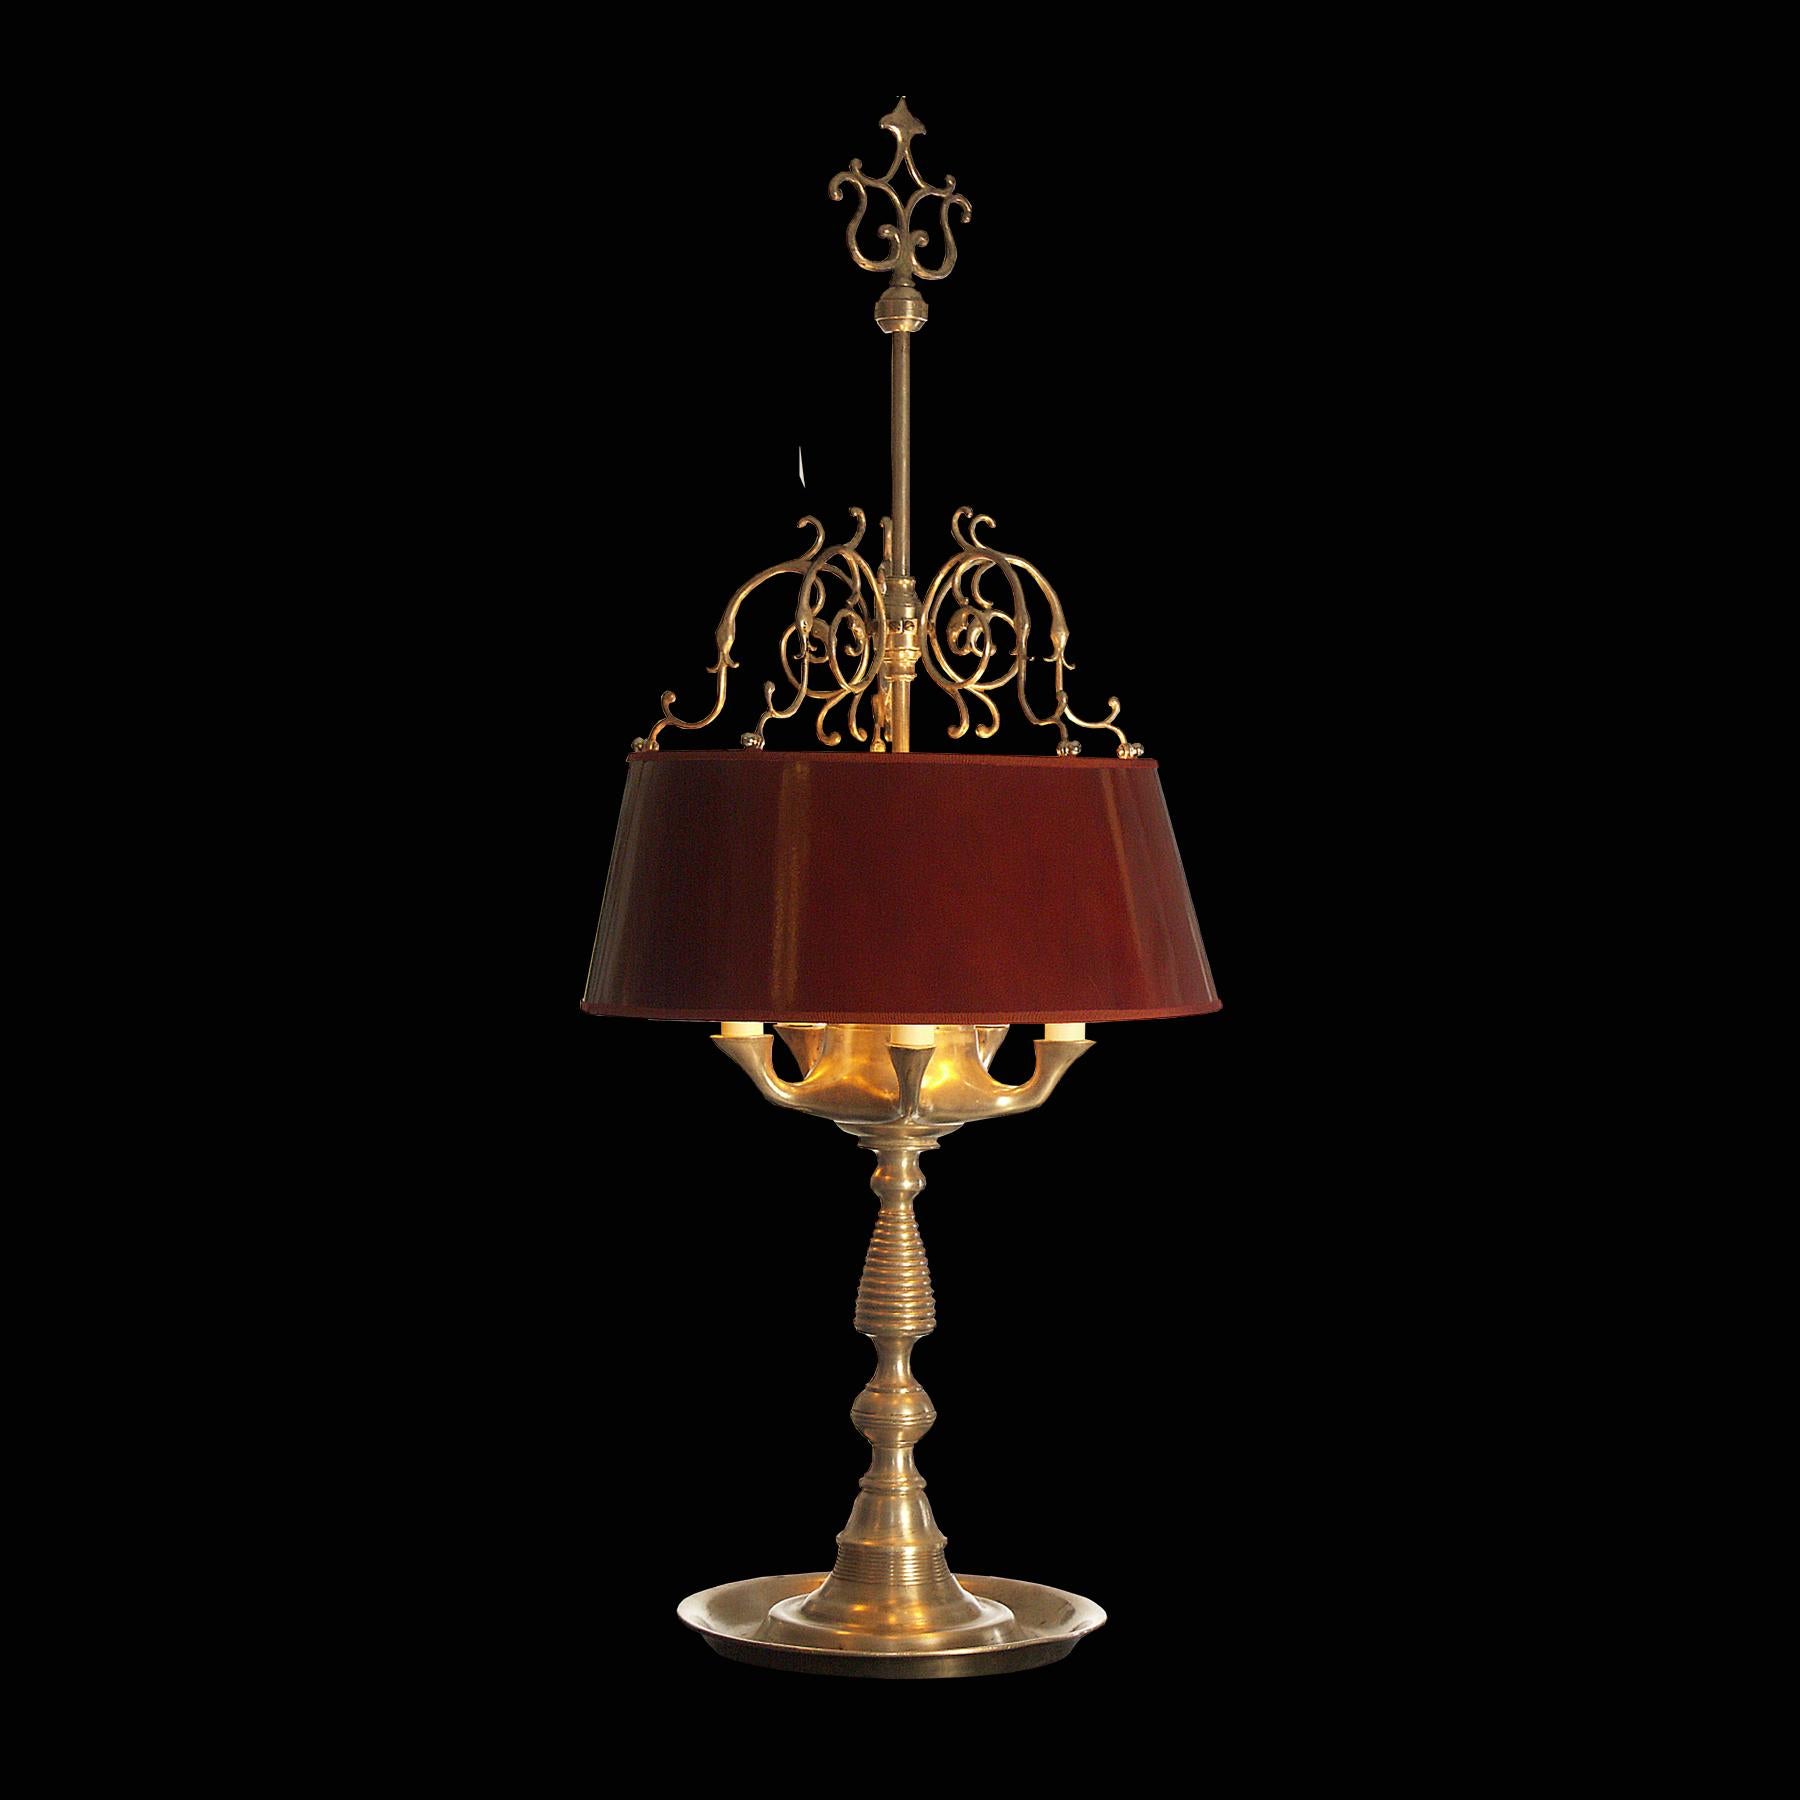 Table-lamp in the style of an antique oil-lamp 
Material used is brass silver plated, lacquered metal shade
Suitable for the US.

